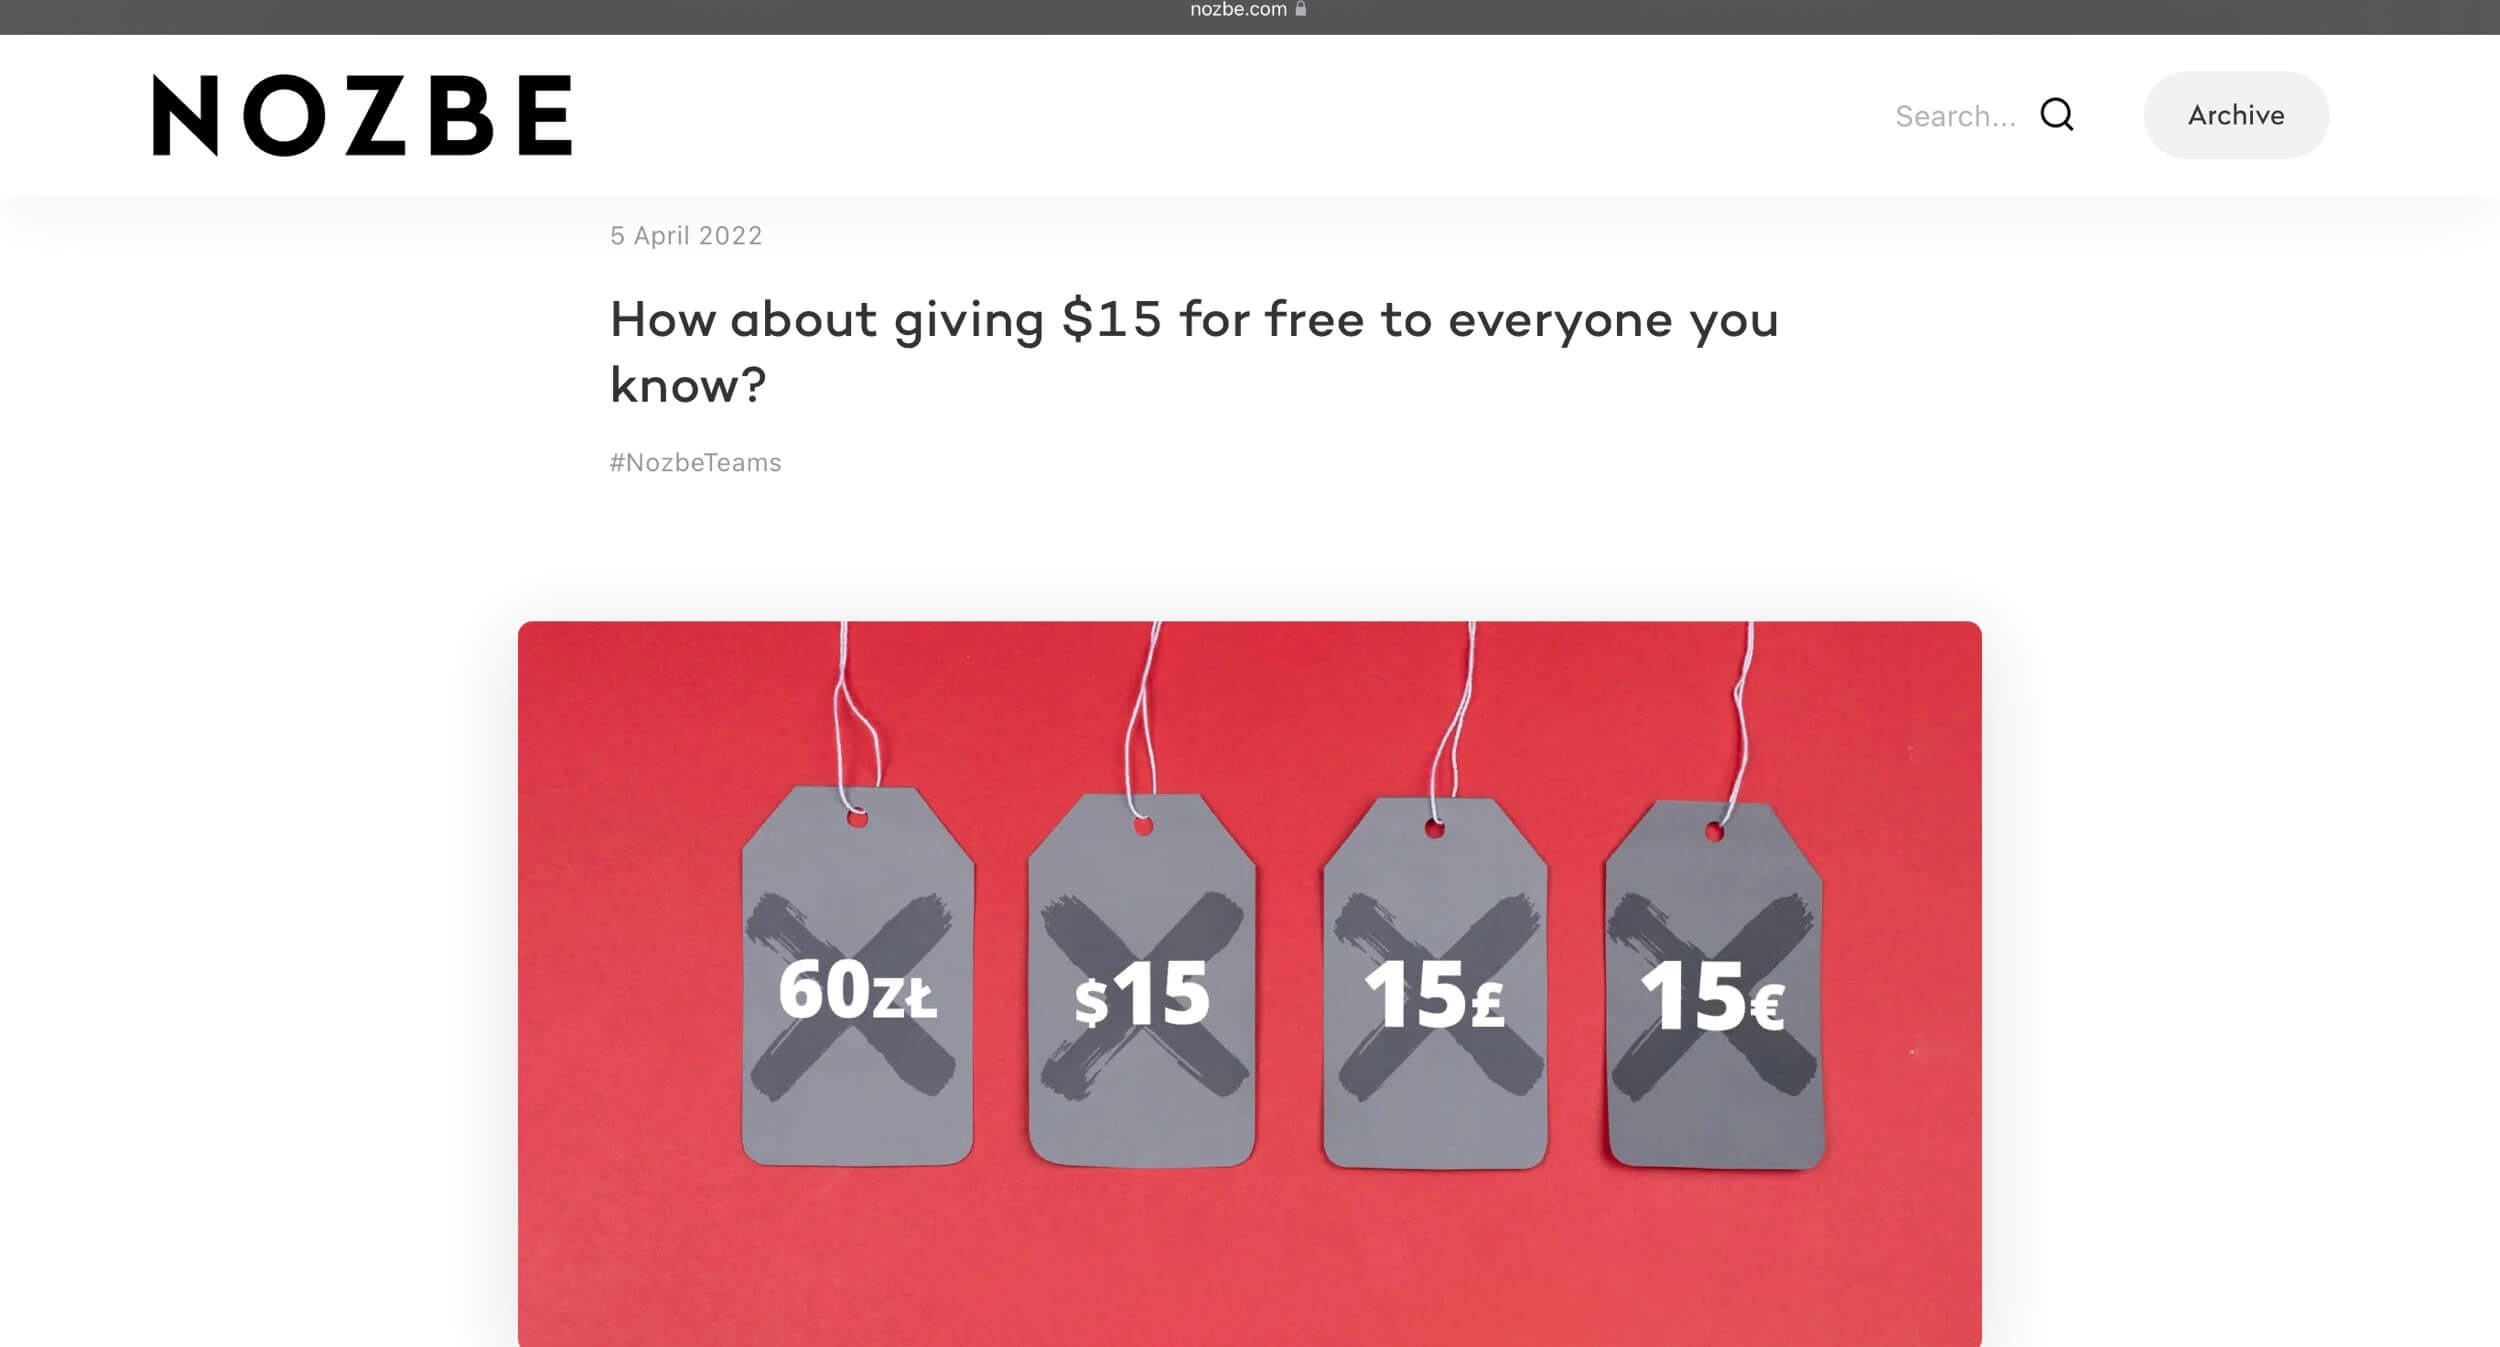 On Nozbe blog - how about giving away $15 for each new team?